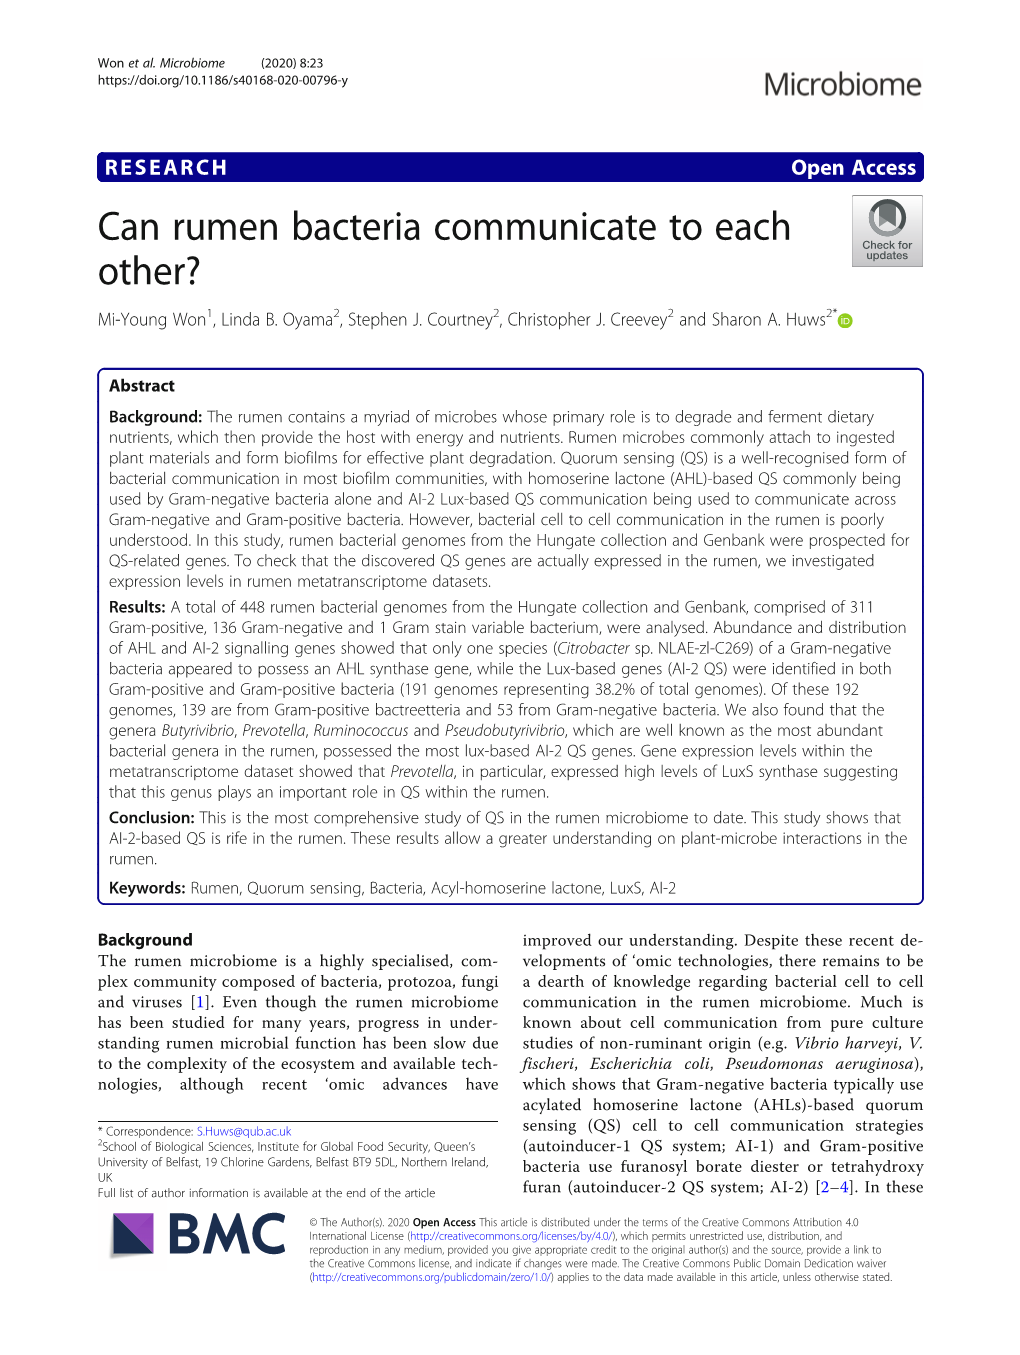 Can Rumen Bacteria Communicate to Each Other? Mi-Young Won1, Linda B